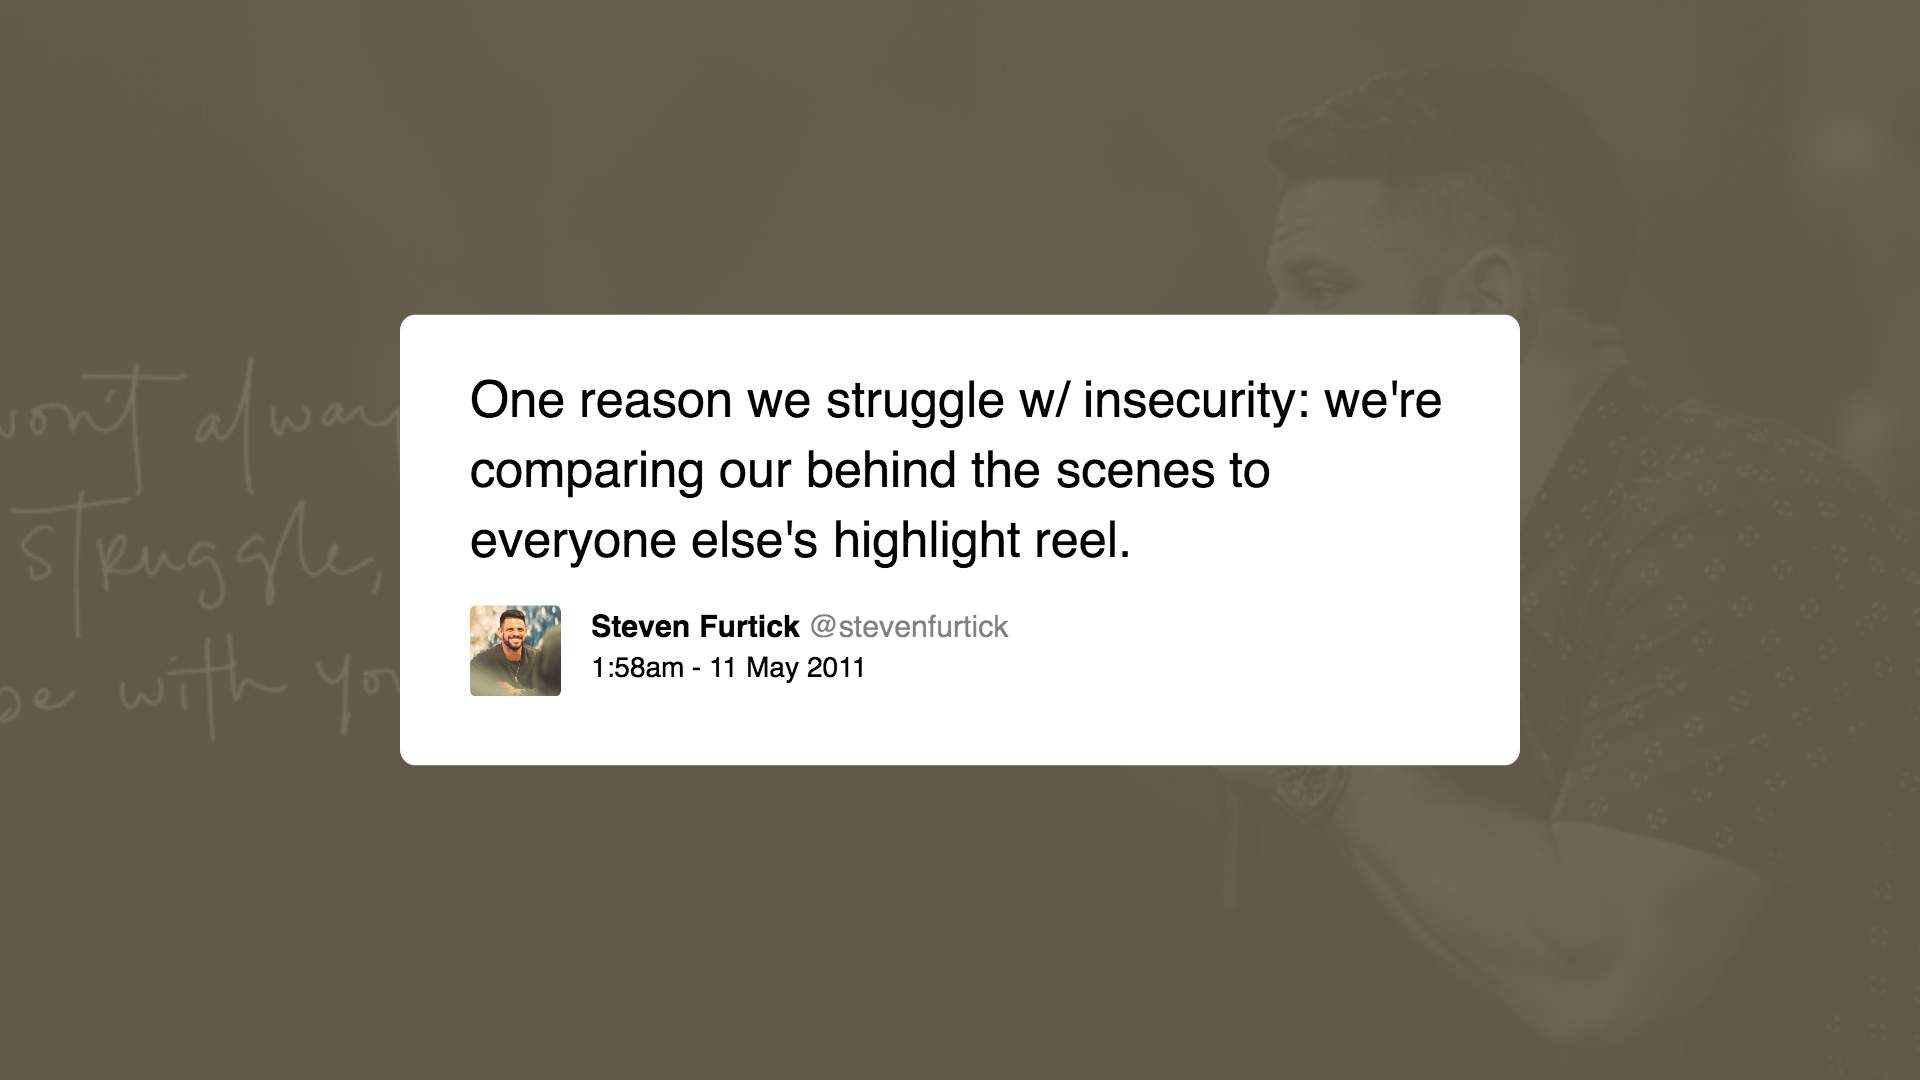 One reason we struggle w/ insecurity: we're comparing our behind the scenes to everyone else's highlight reel.